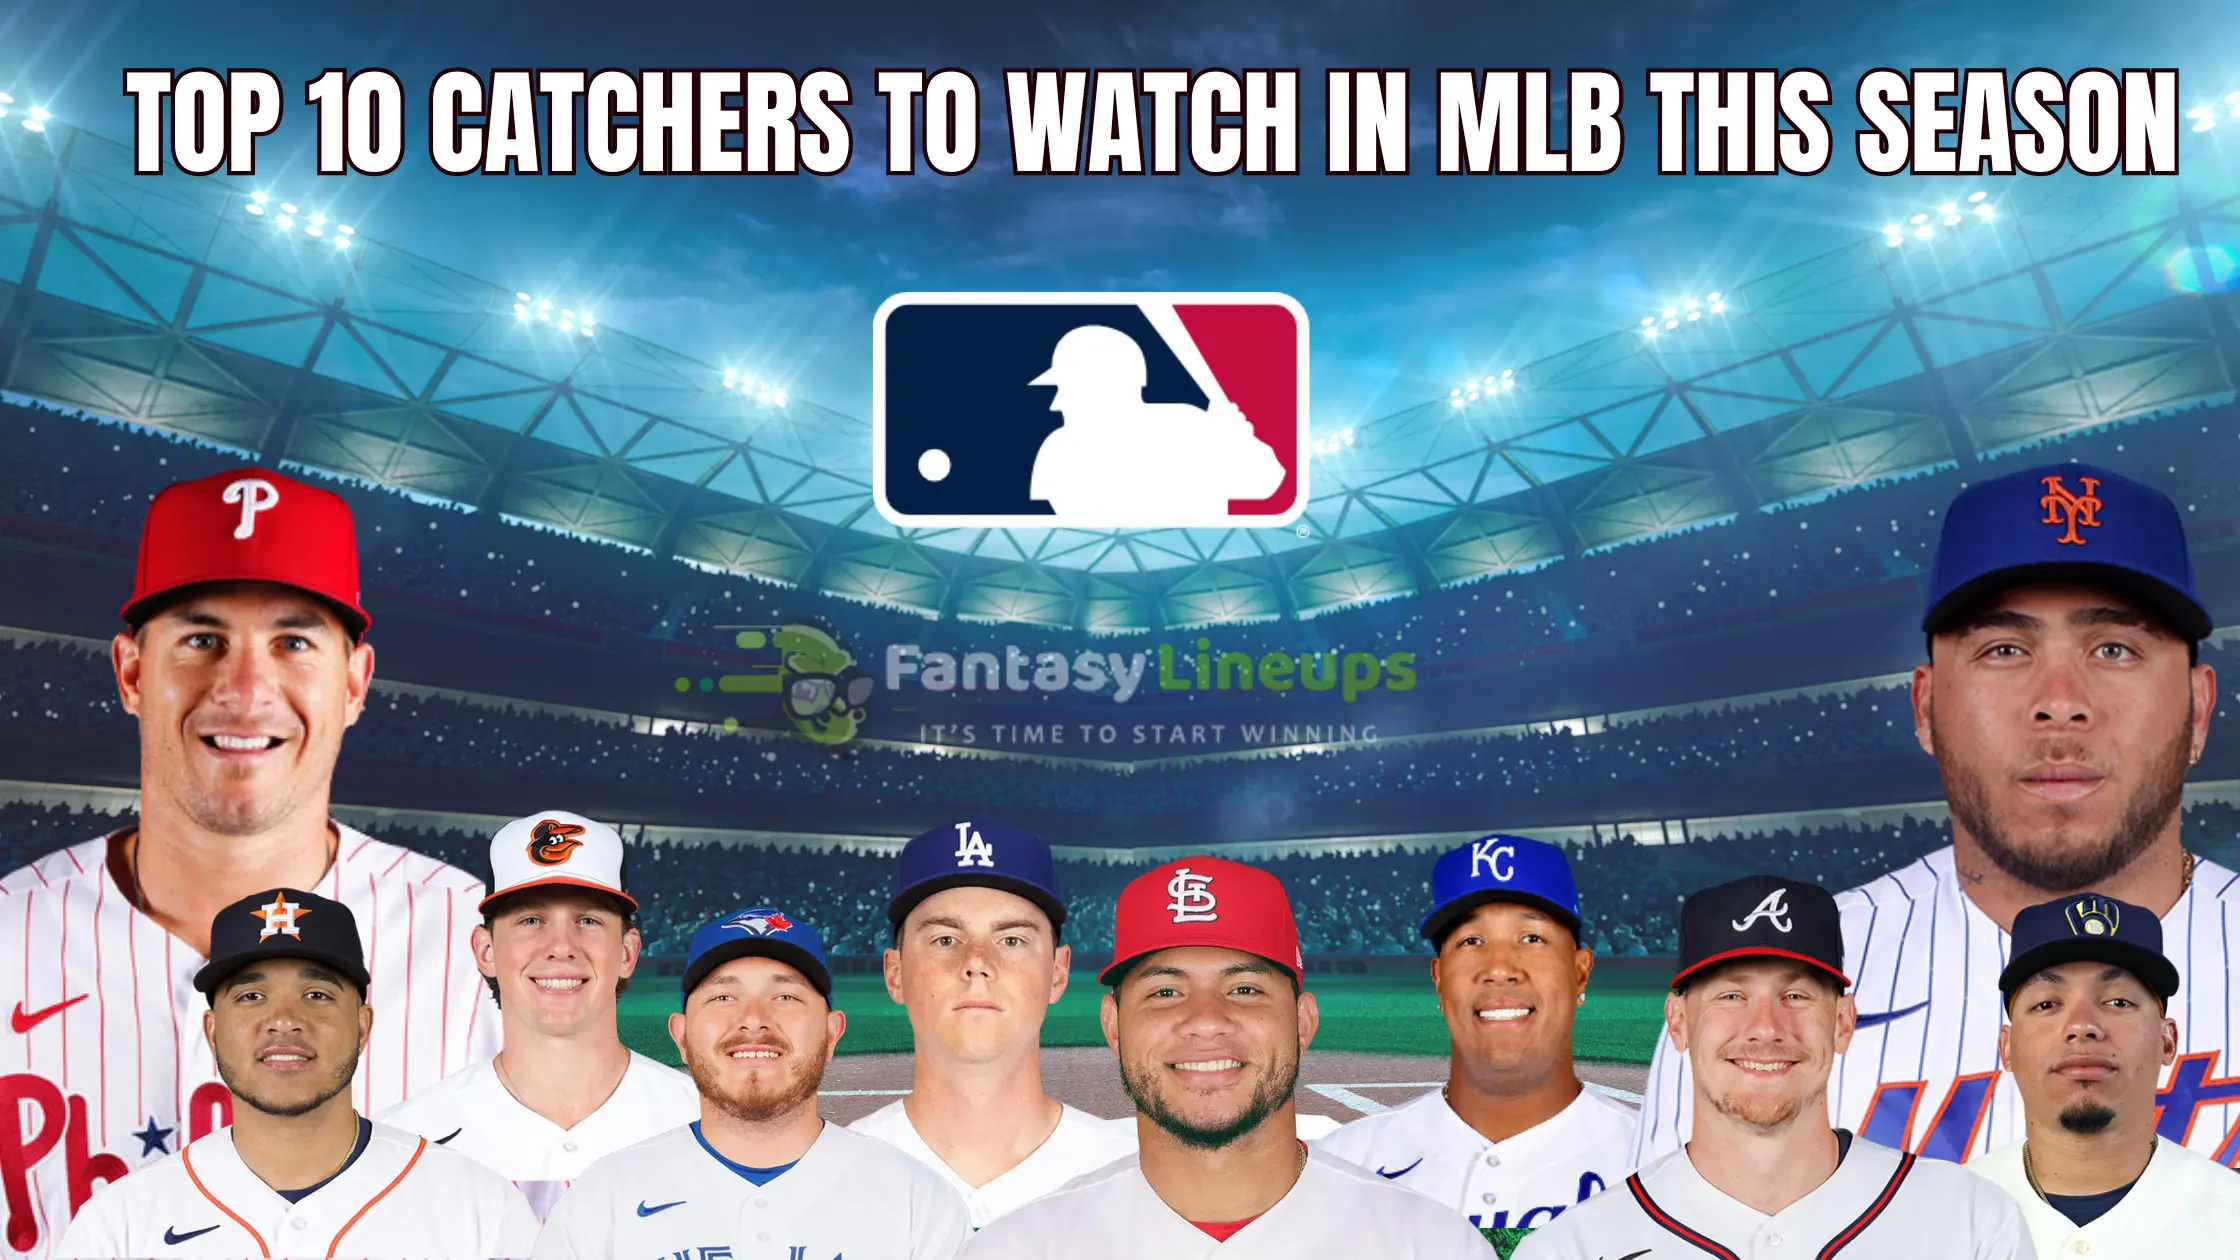 Top 10 Catchers to Watch in MLB This Season: An Unmissable Guide